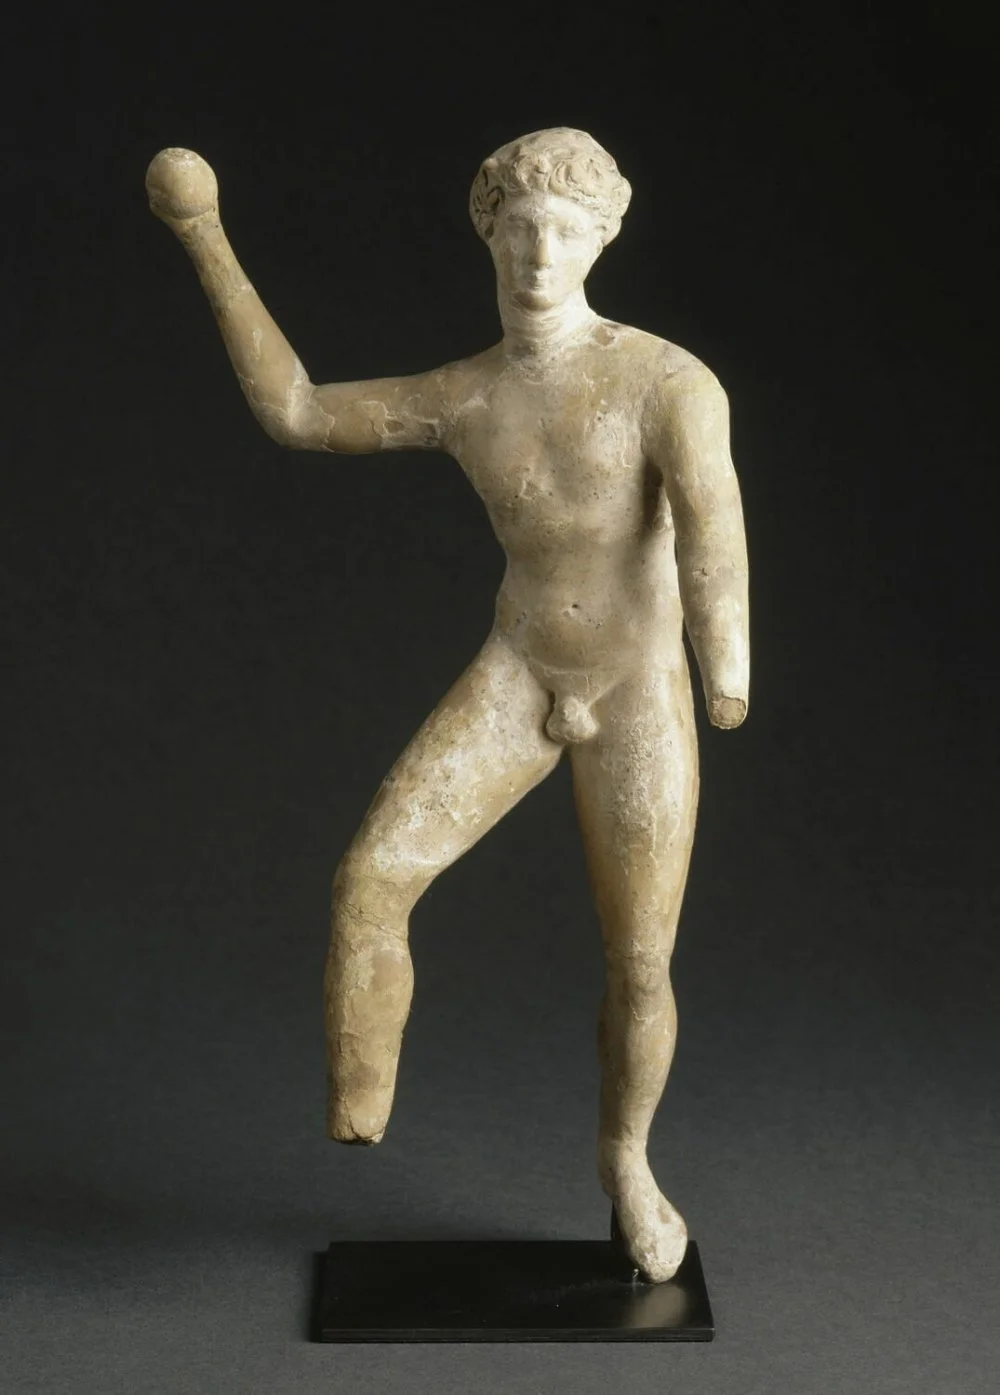 Ballgame player. Terracotta figurine made in Corinth, 3rd century BC. From Corinth/Musée du Louvre